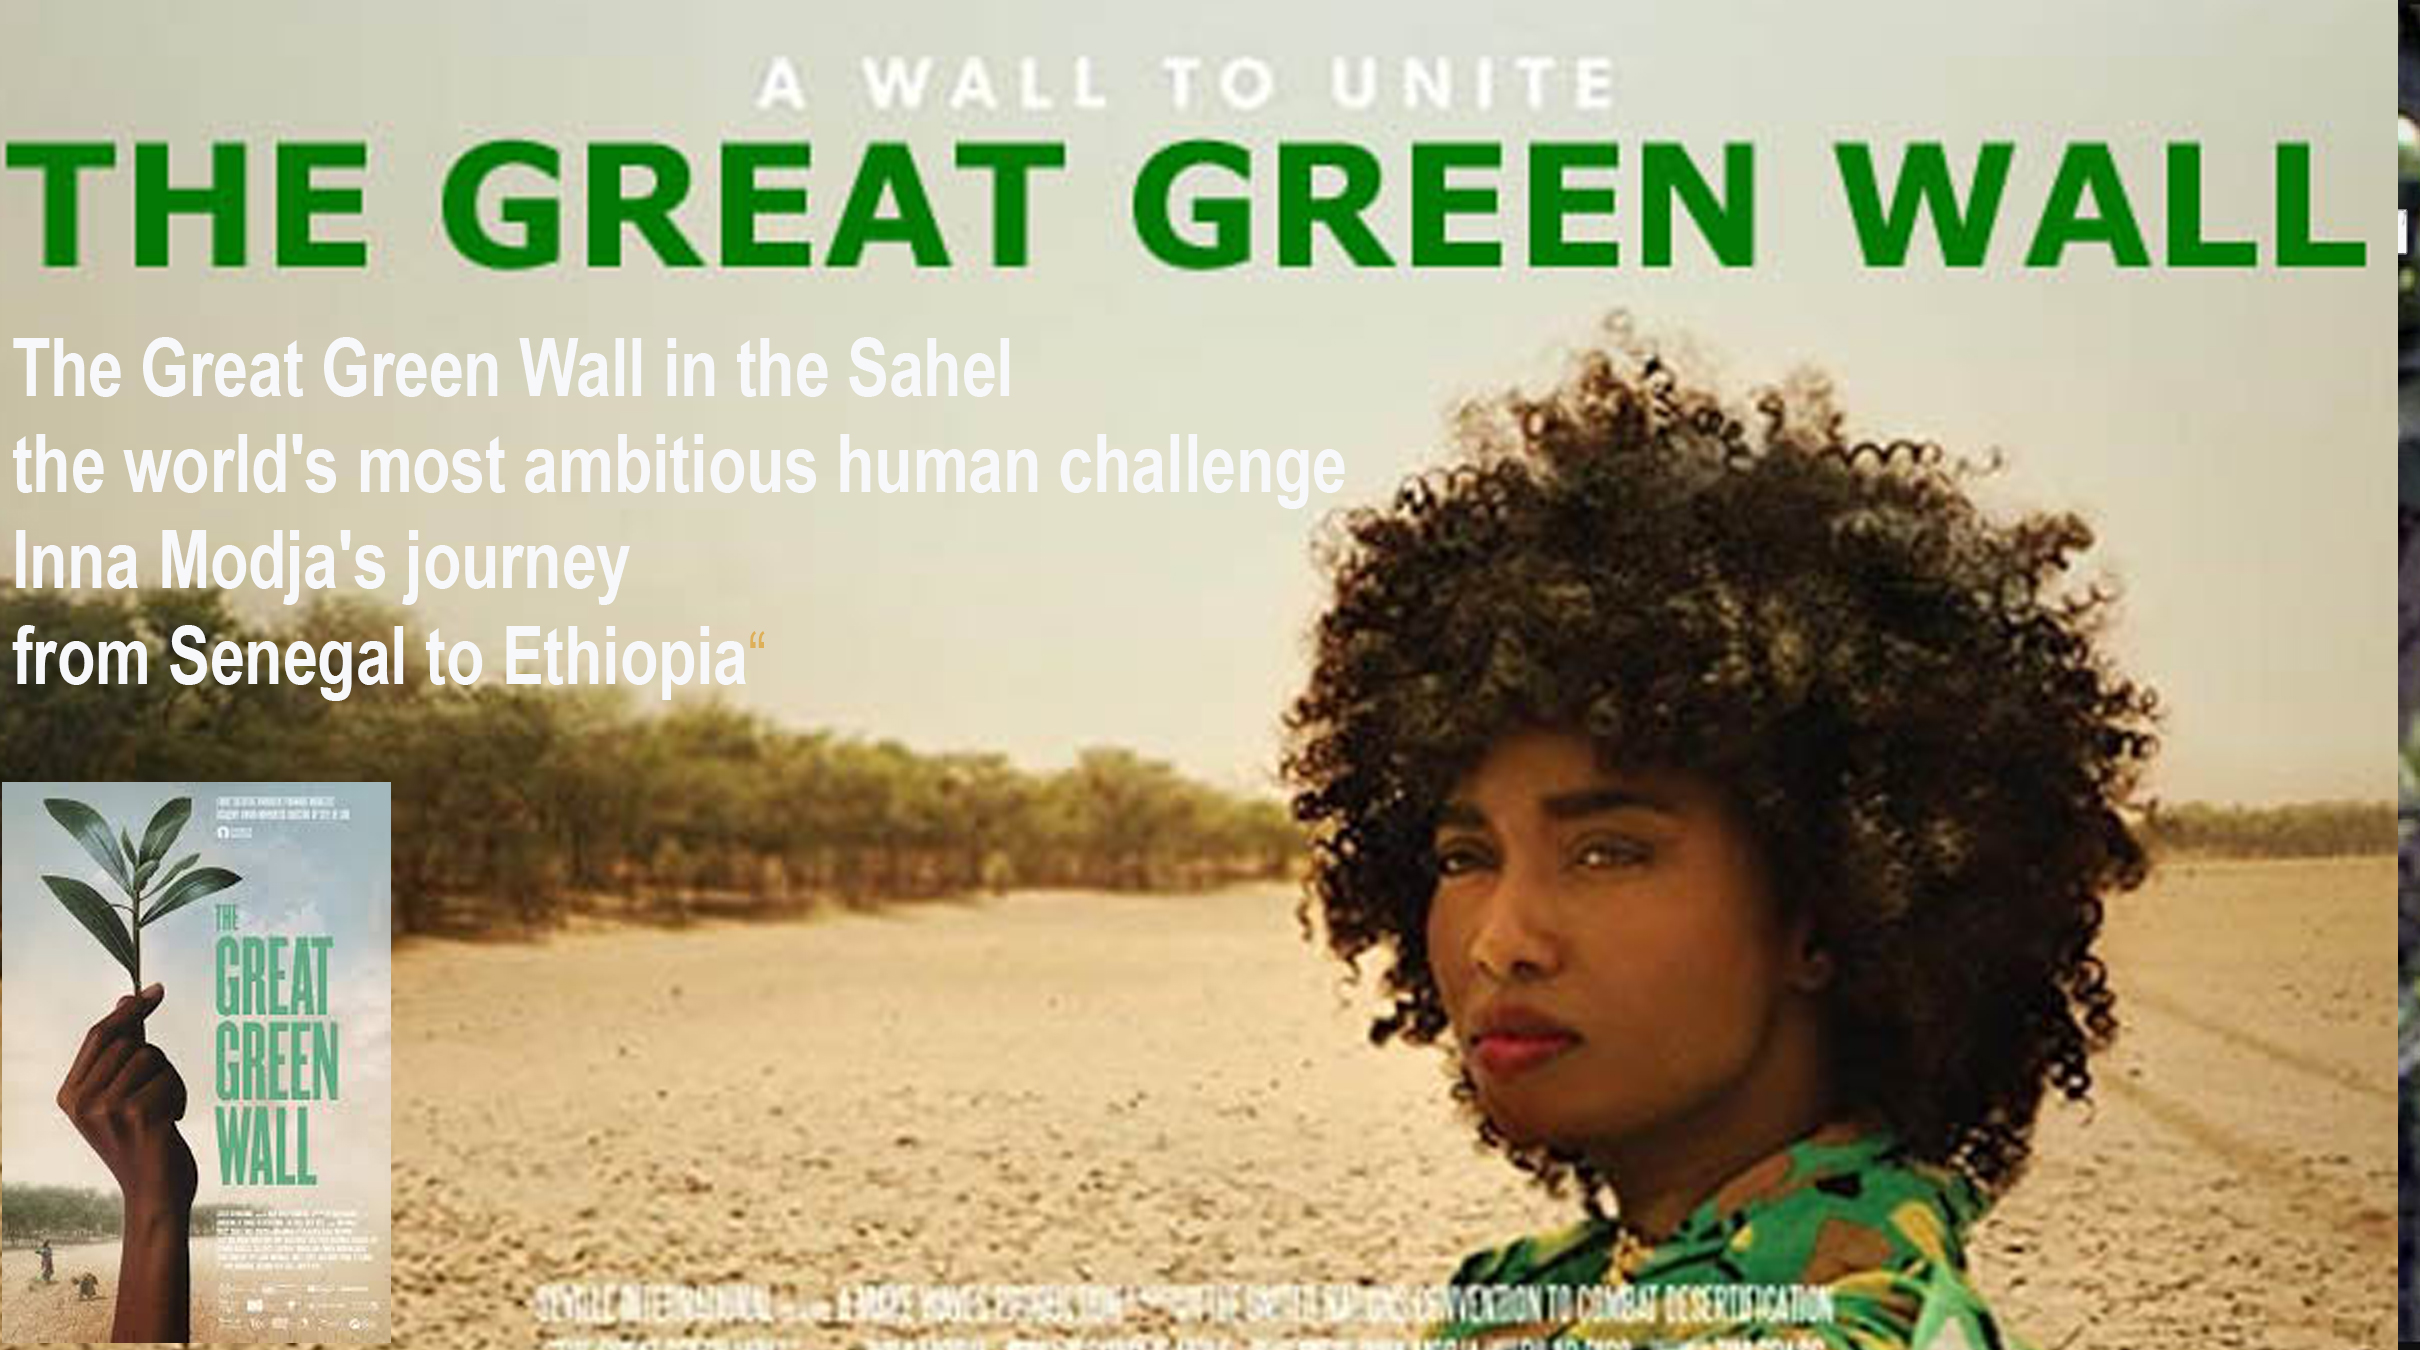 AFRICA-VOGUE-COVER-The-Great-Green-Wall-in-the-Sahel-the-world's-most-ambitious-human-challenge-Inna-Modja's-journey-from-Senegal-to-Ethiopia-DN-AFRICA-MEDIA-PARTNER